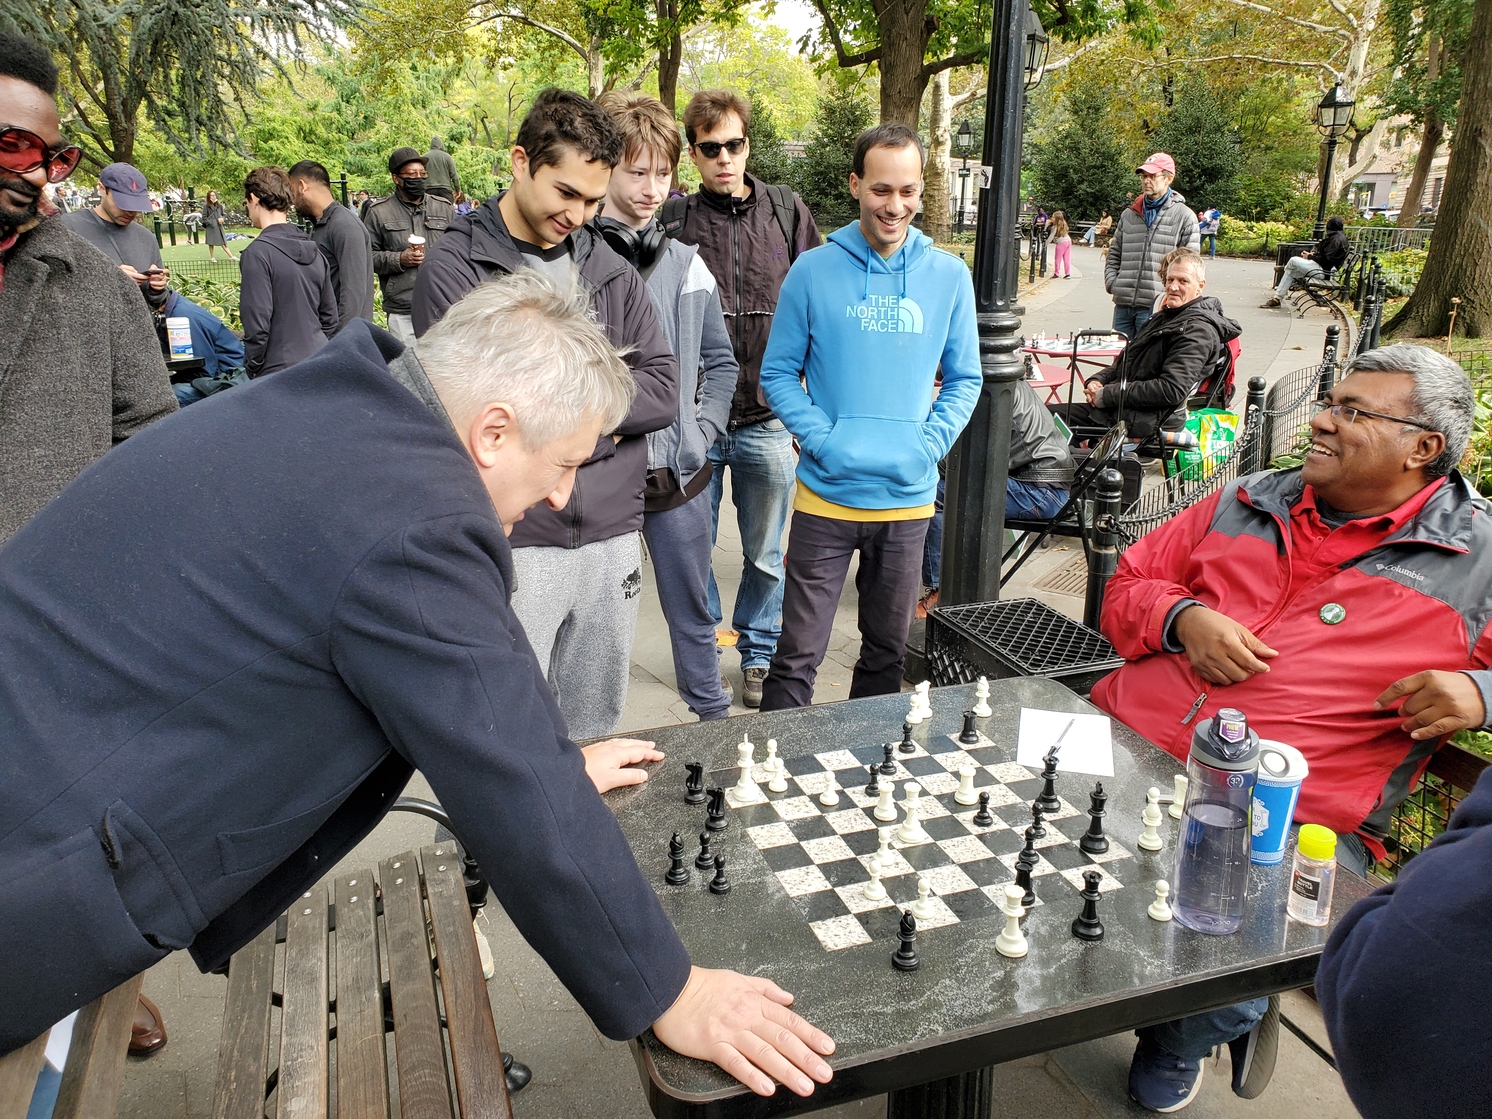 The Field  Grand Chess Tour